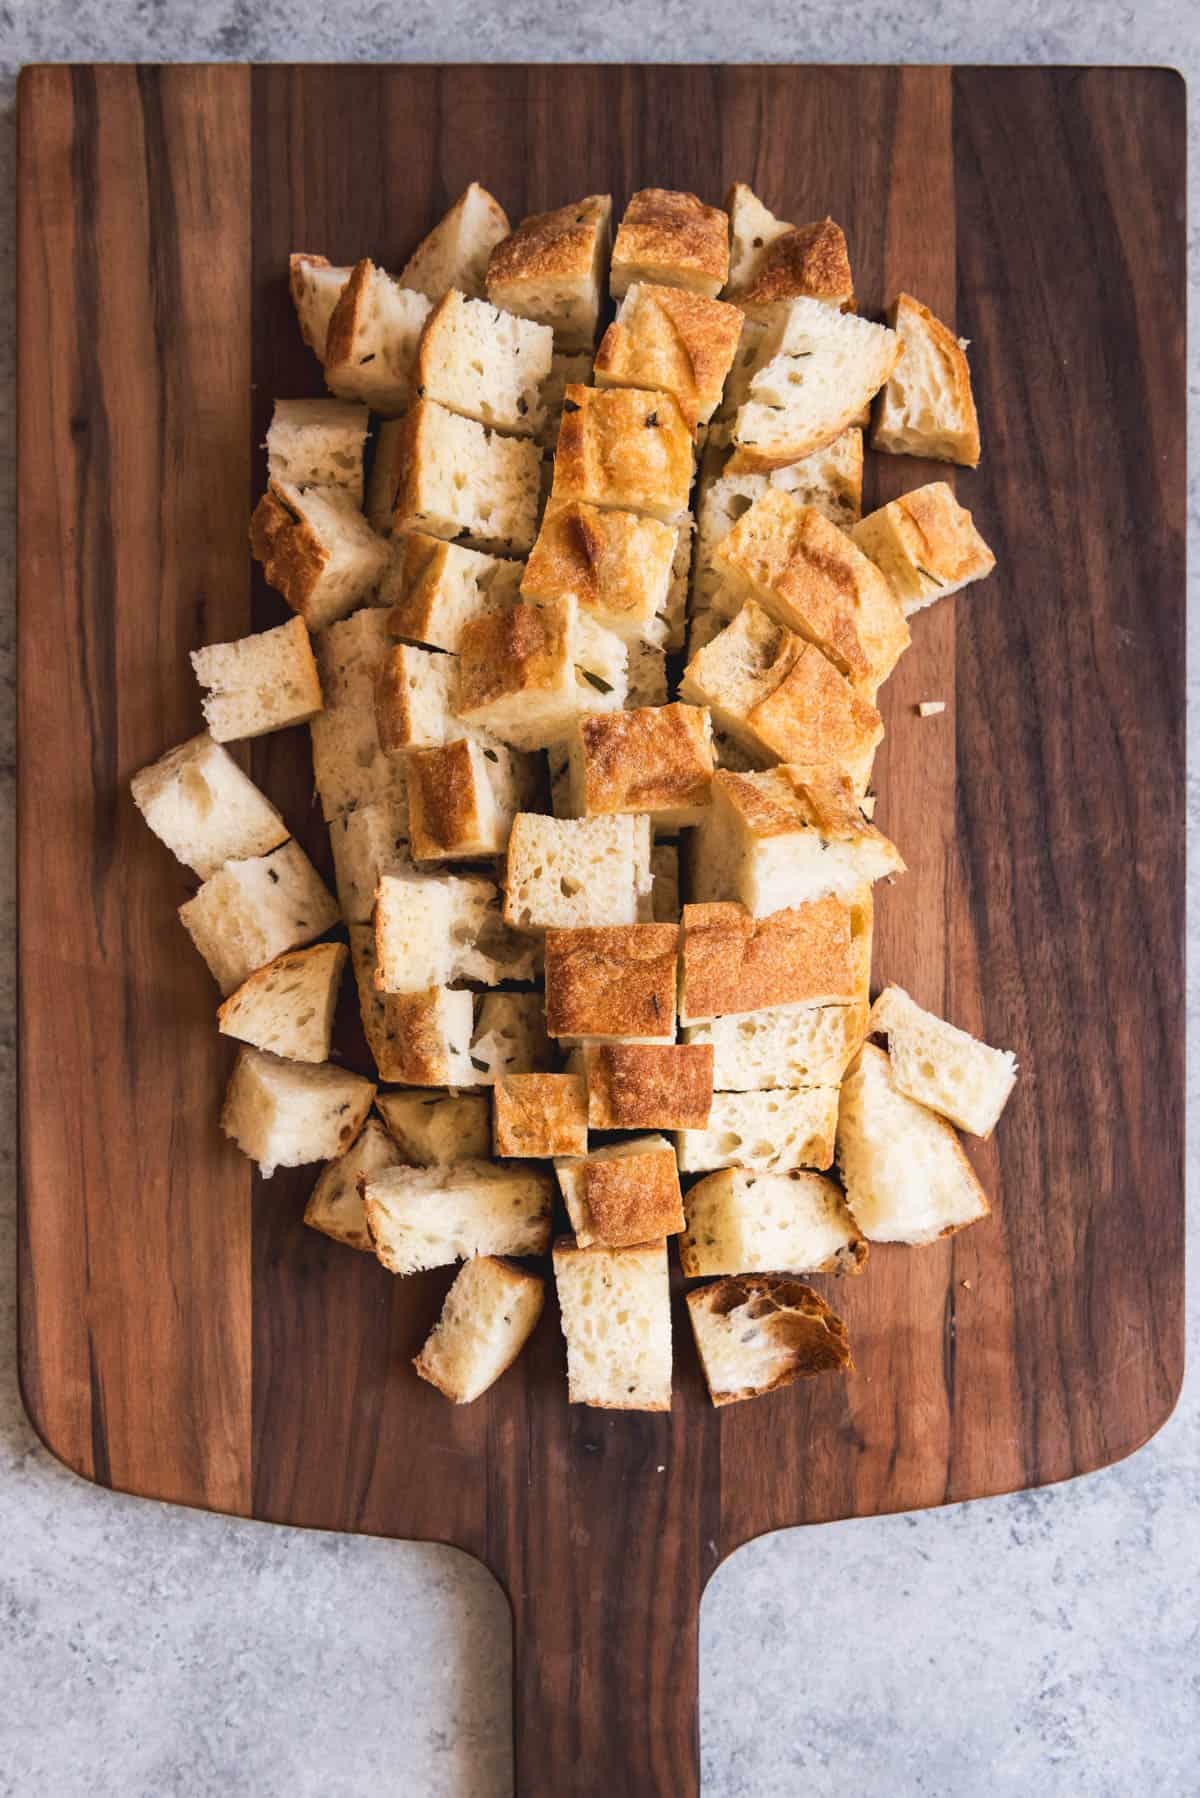 An image of a loaf of crusty bread sliced into cubes before being toasted for a Panzanella bread salad.